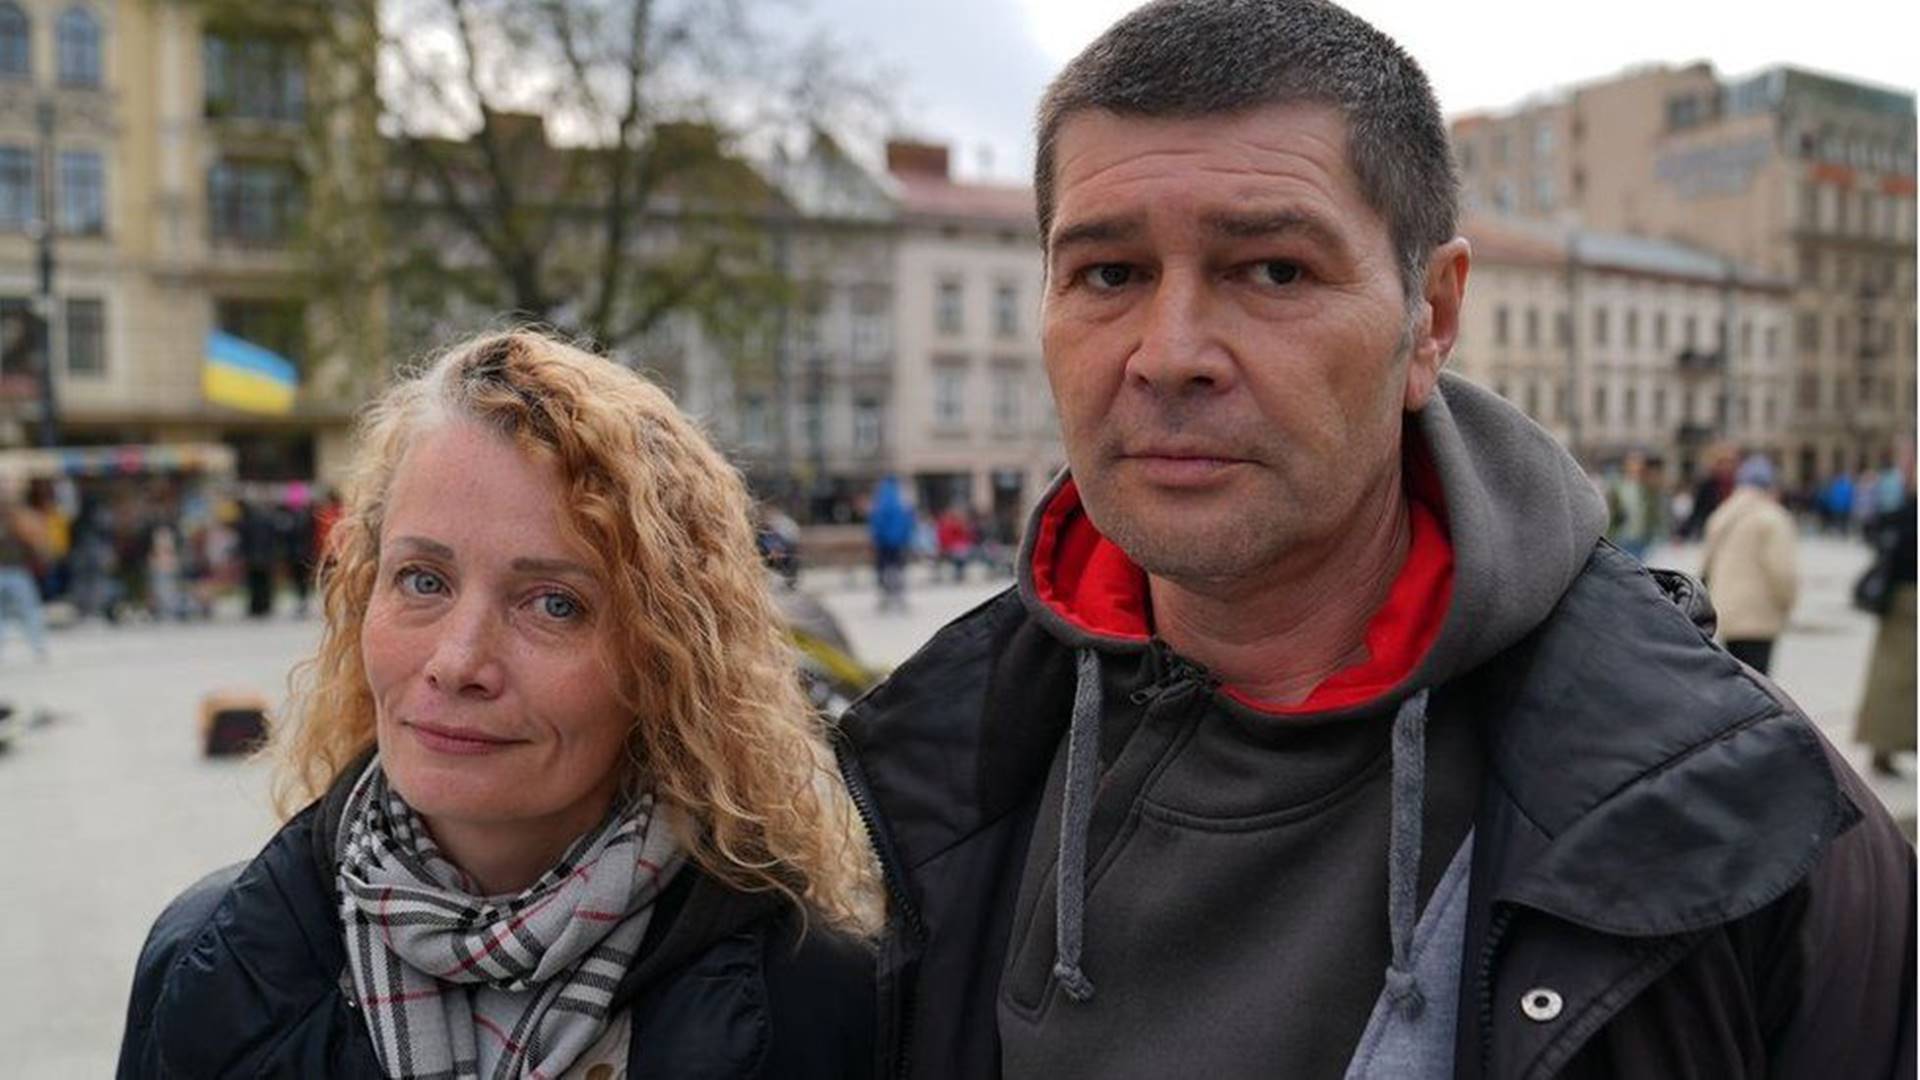 Olena and Oleksandr: Mariupol refugees on the trauma of Russian detention camps